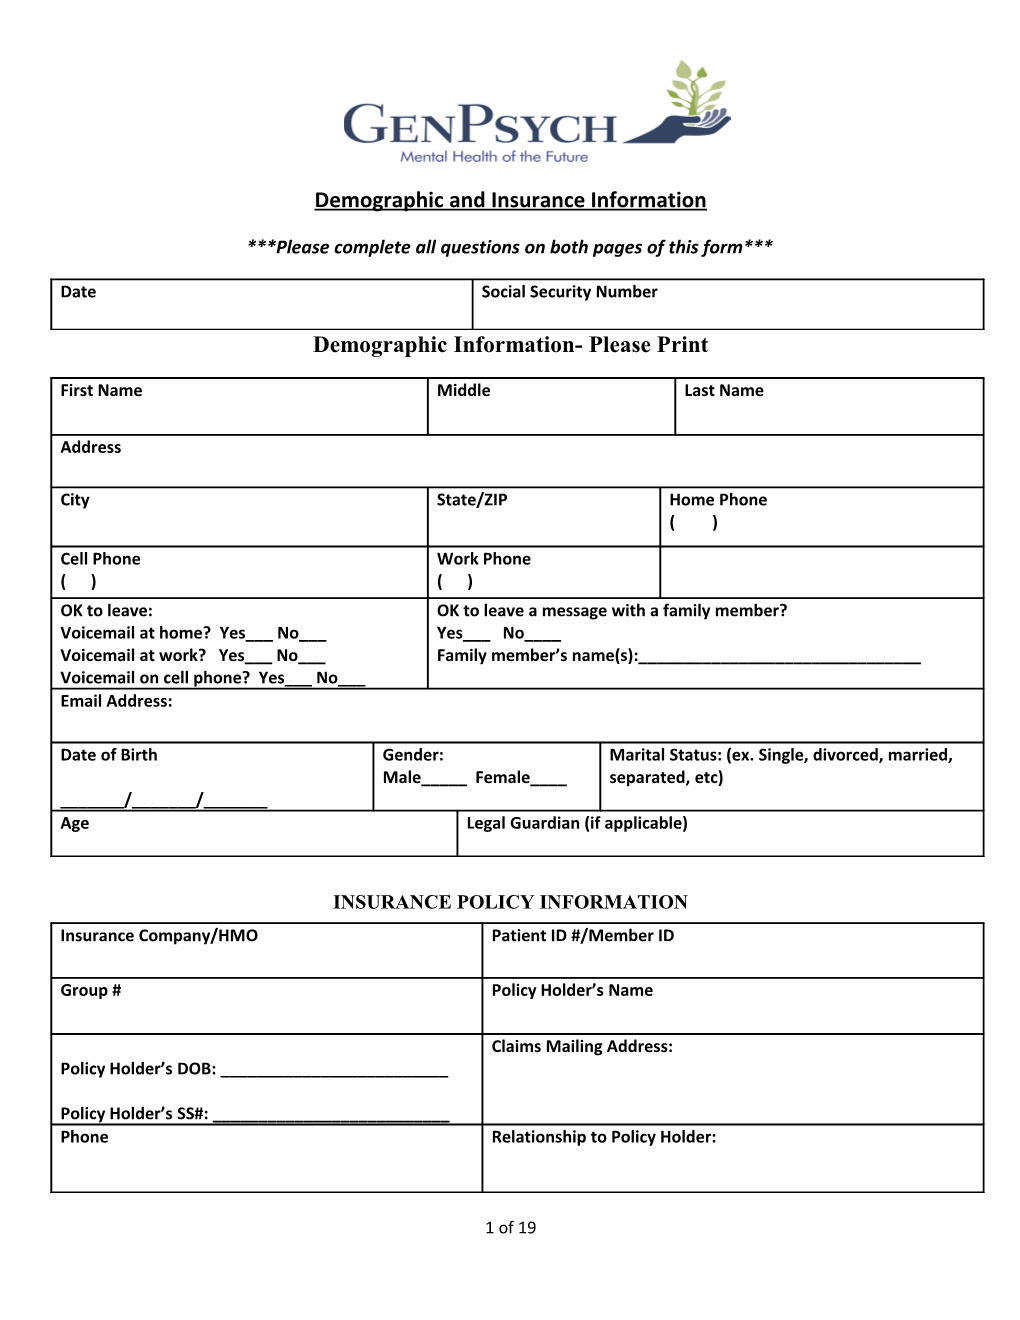 Please Complete All Questions on Both Pages of This Form